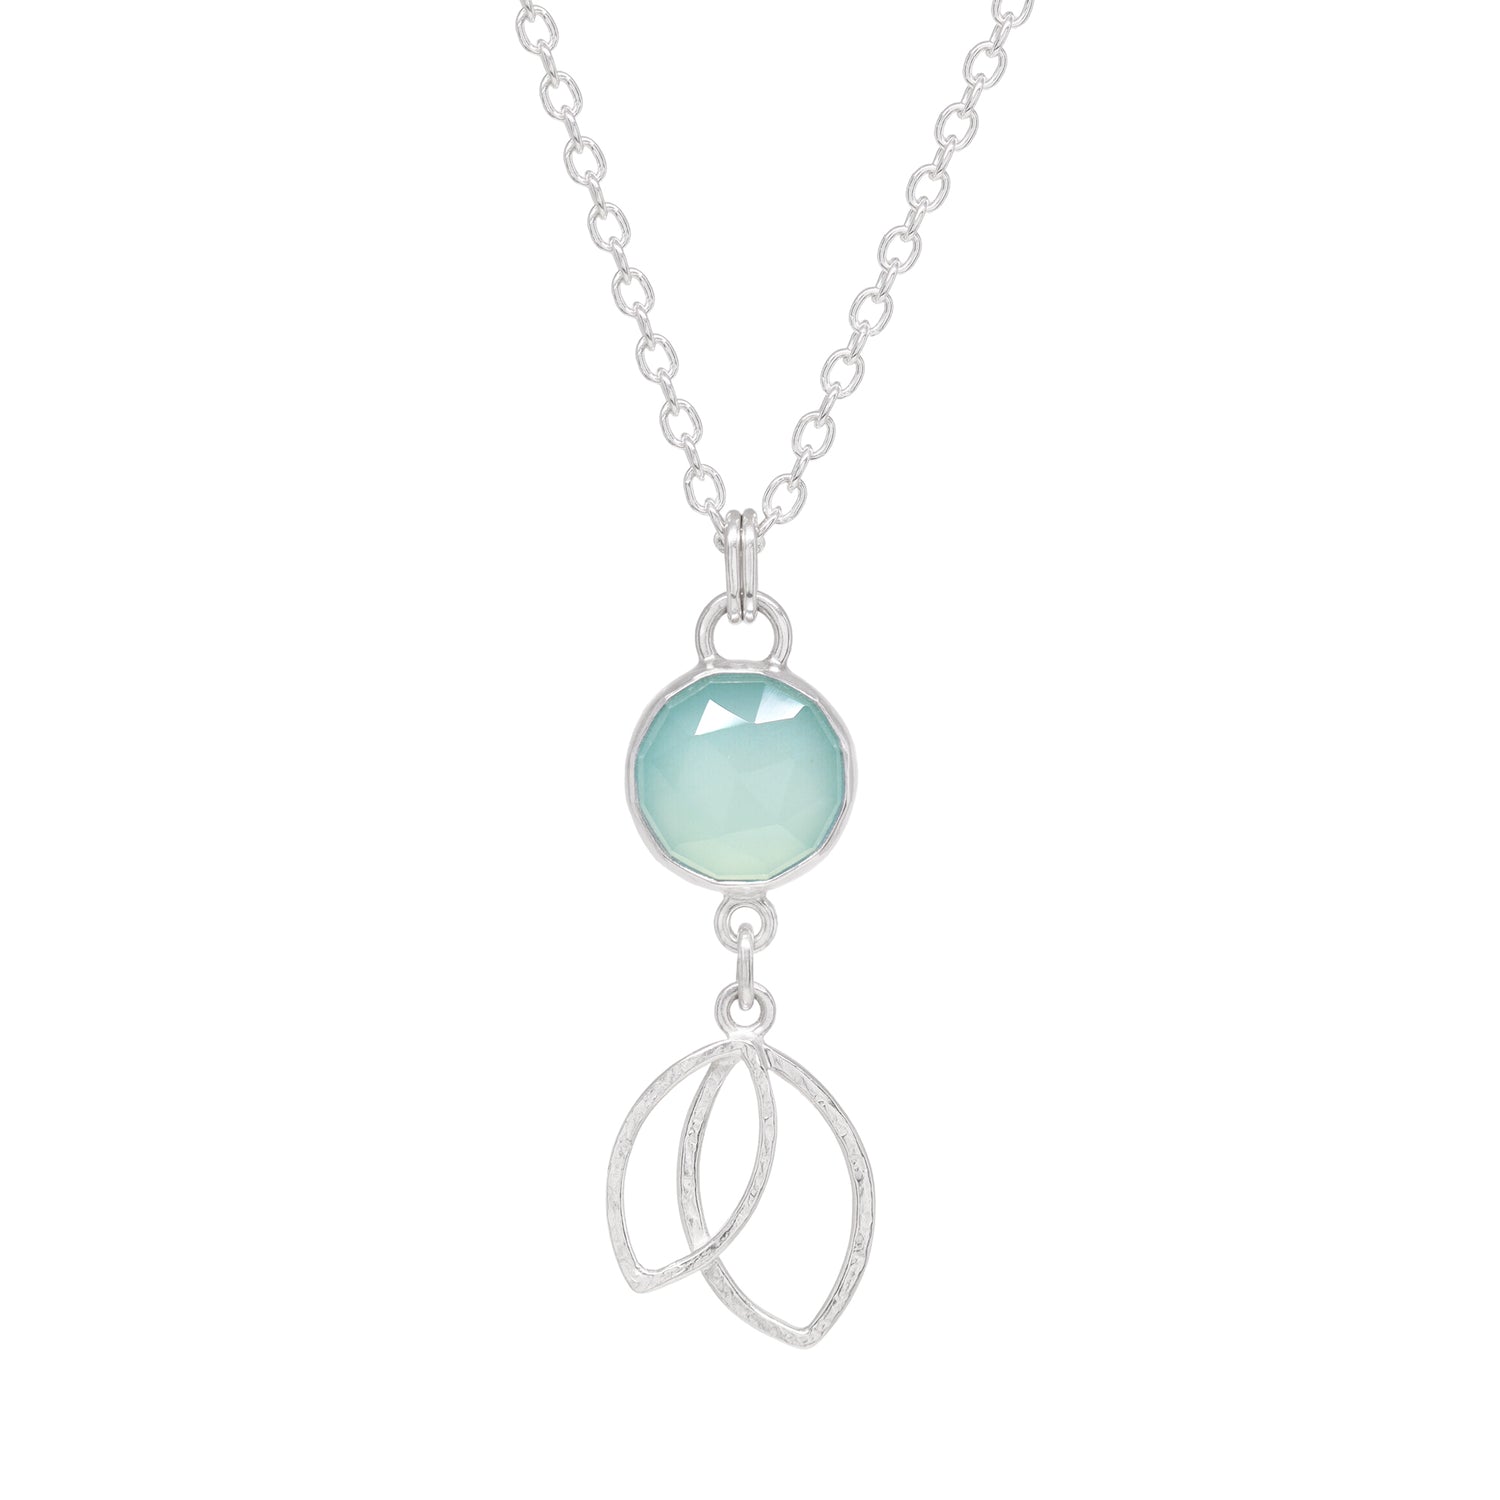 Double Leaf Necklace Small - Chalcedony - Bright Sterling